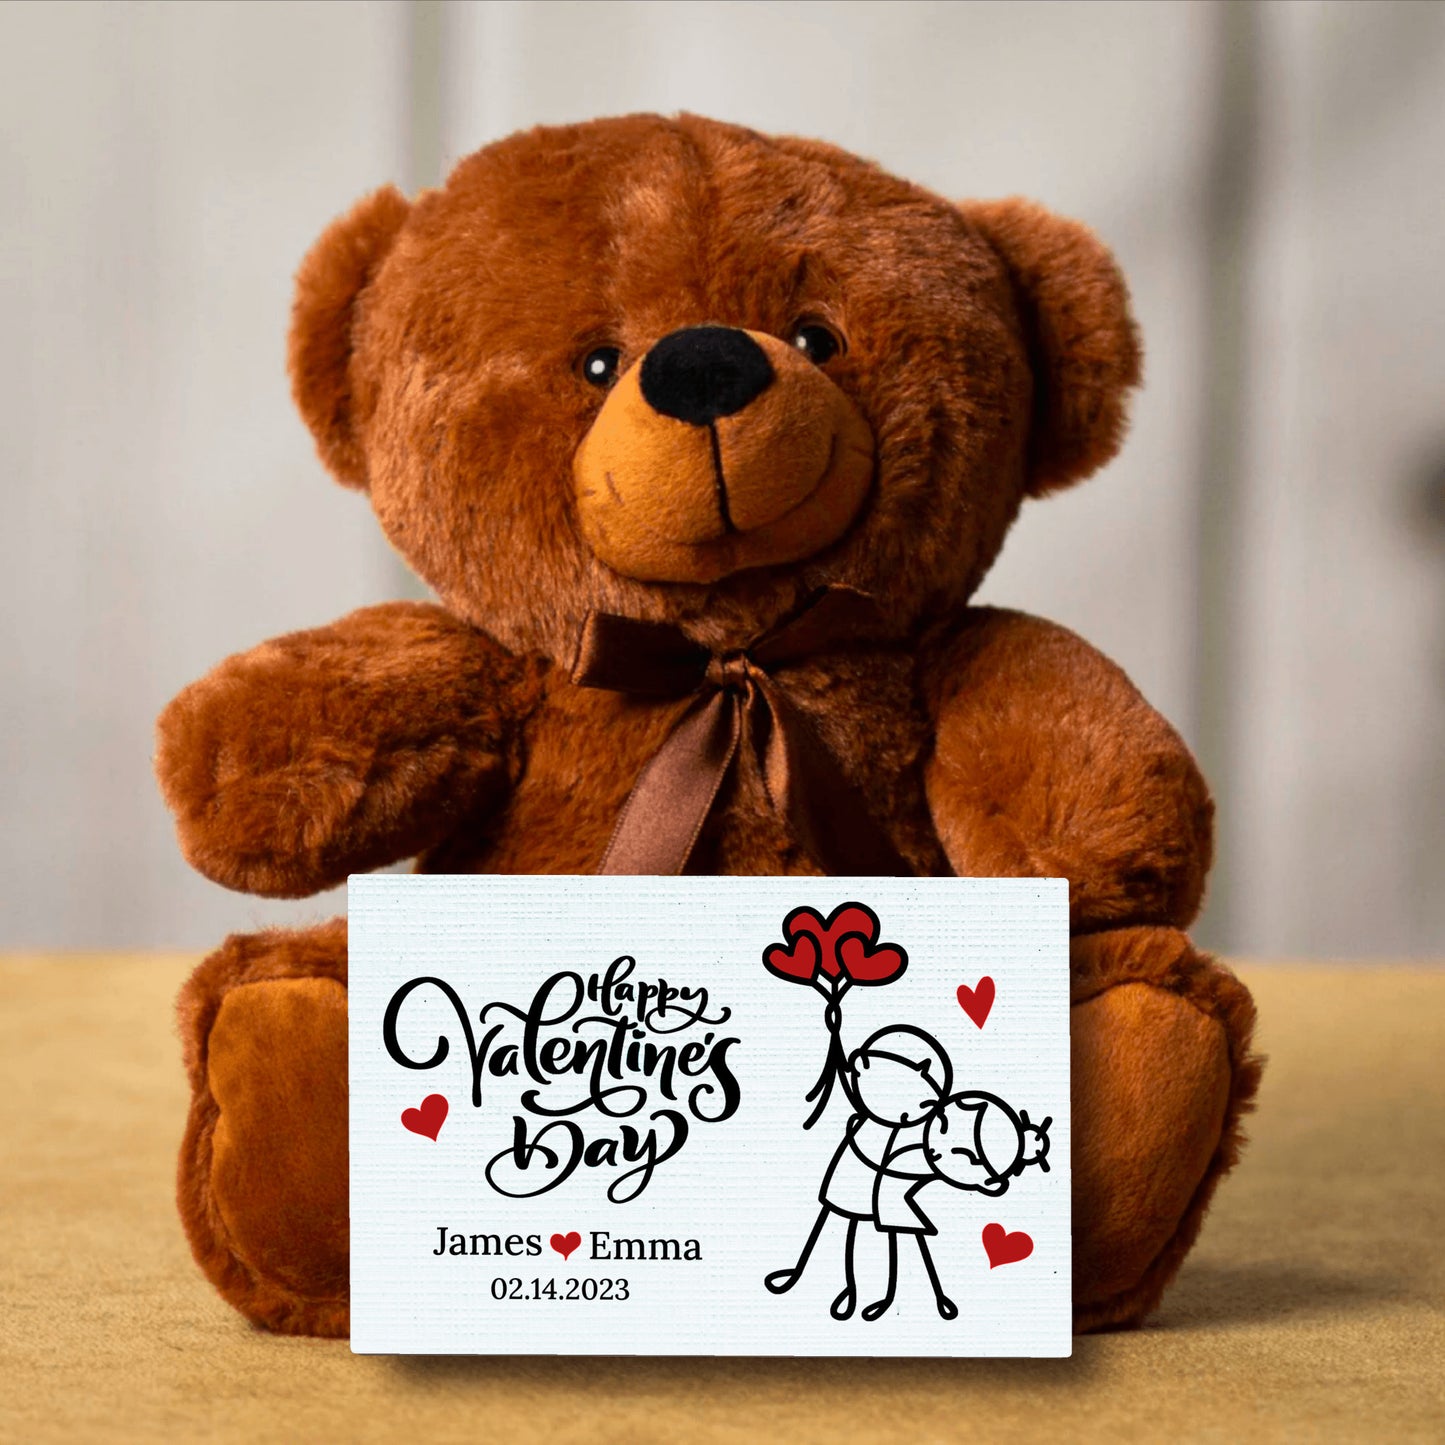 Soft Personalized Teddy Bear - Custom Post Card With Message - Happy Valentines Line Art Couple - Perfect Valentine's Gift